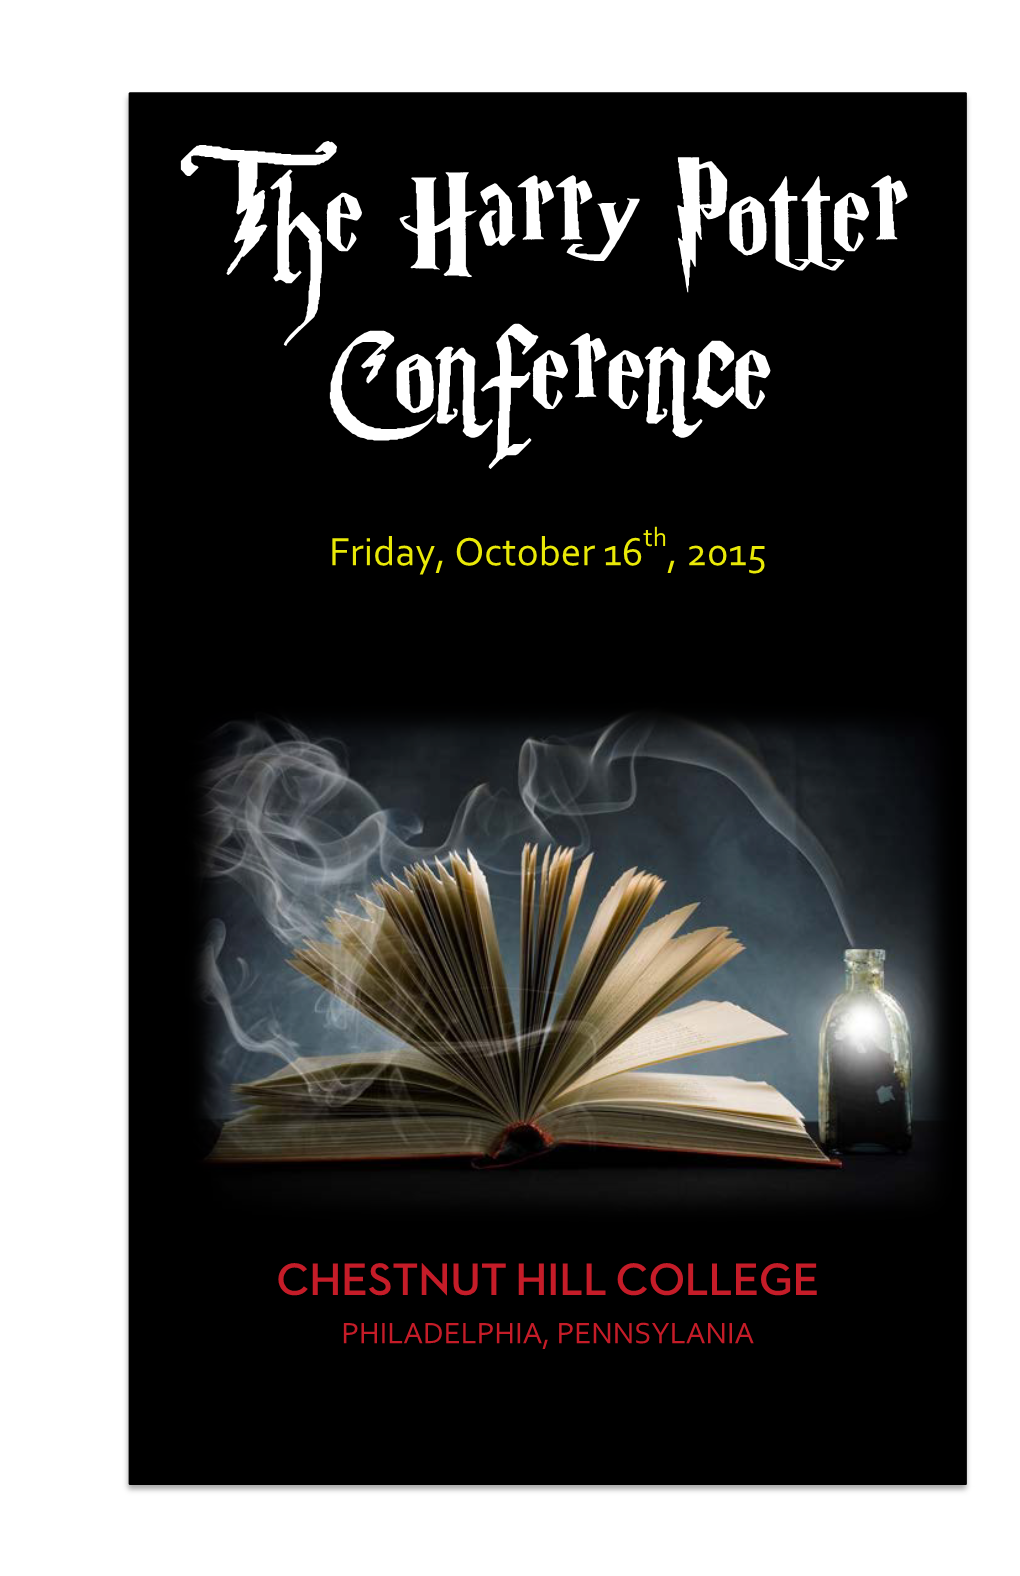 The Harry Potter Conference Is an Annual Academic Conference Held at CONFERENCE ART EXHIBIT ……………………….… 25-27 Chestnut Hill College in Philadelphia, Pennsylvania